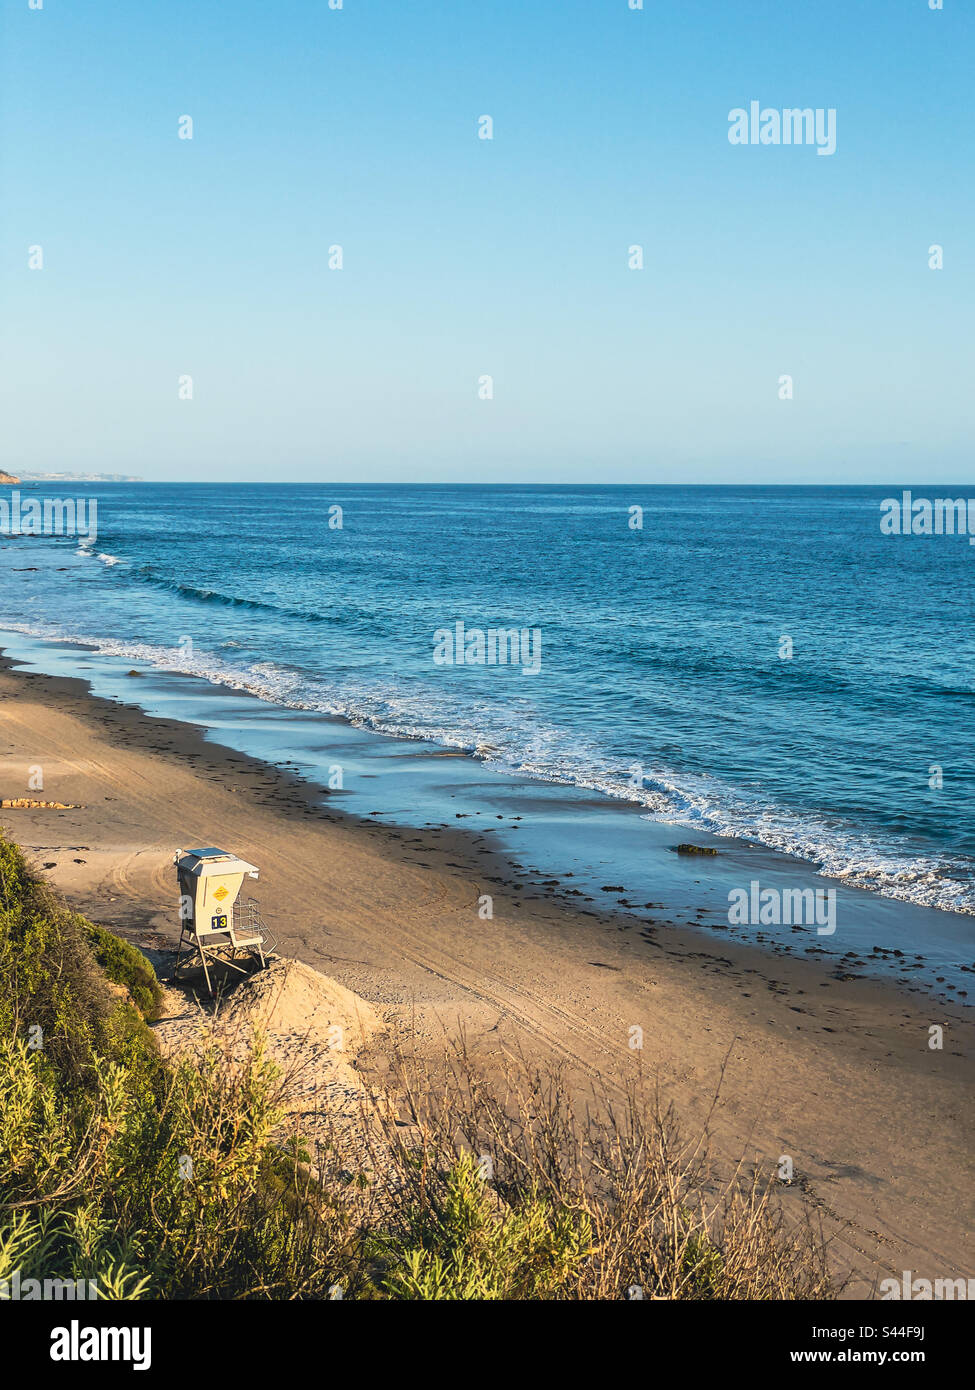 High angle view of a sandy beach with lifeguard stand and ocean under a blue sky. Stock Photo